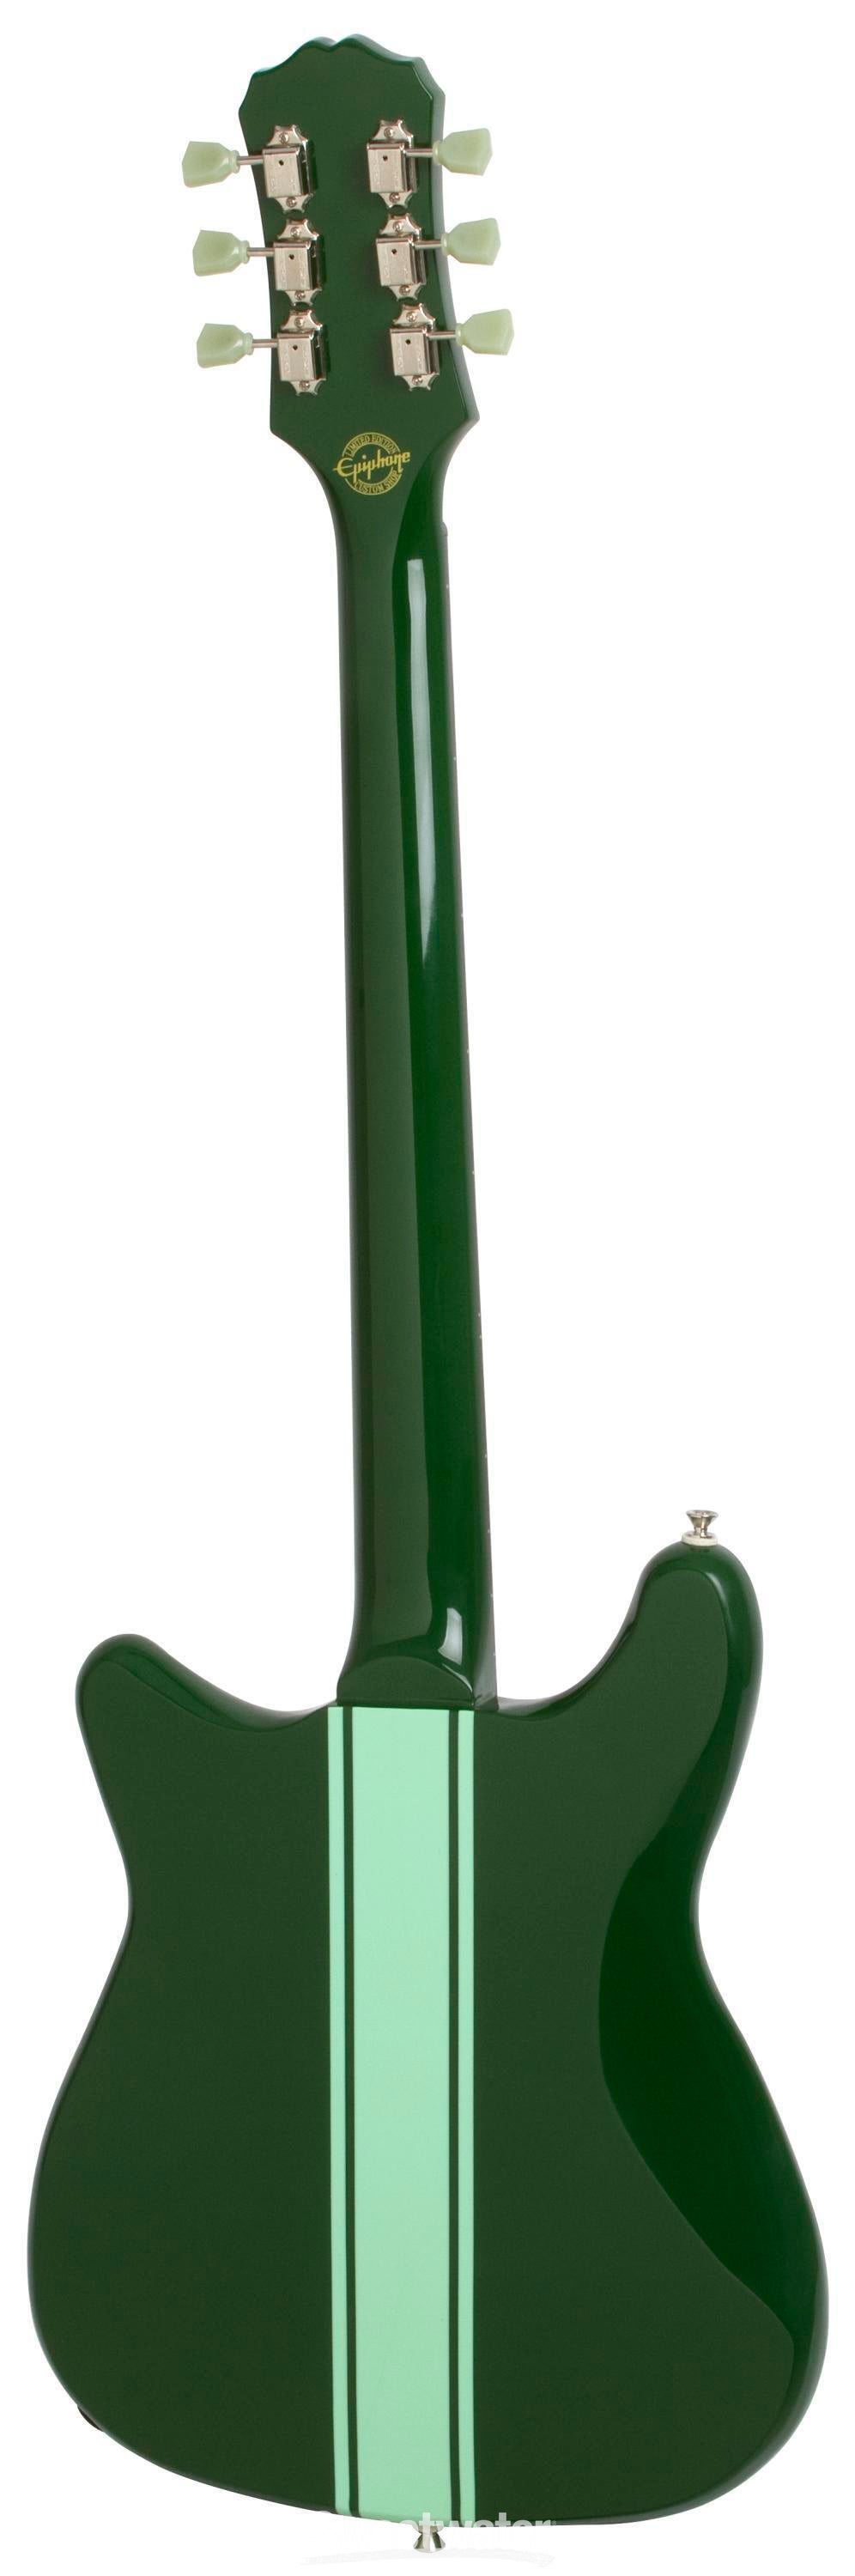 Epiphone Limited Edition Wilshire Phant-o-matic - Limited Edition Emerald  Green